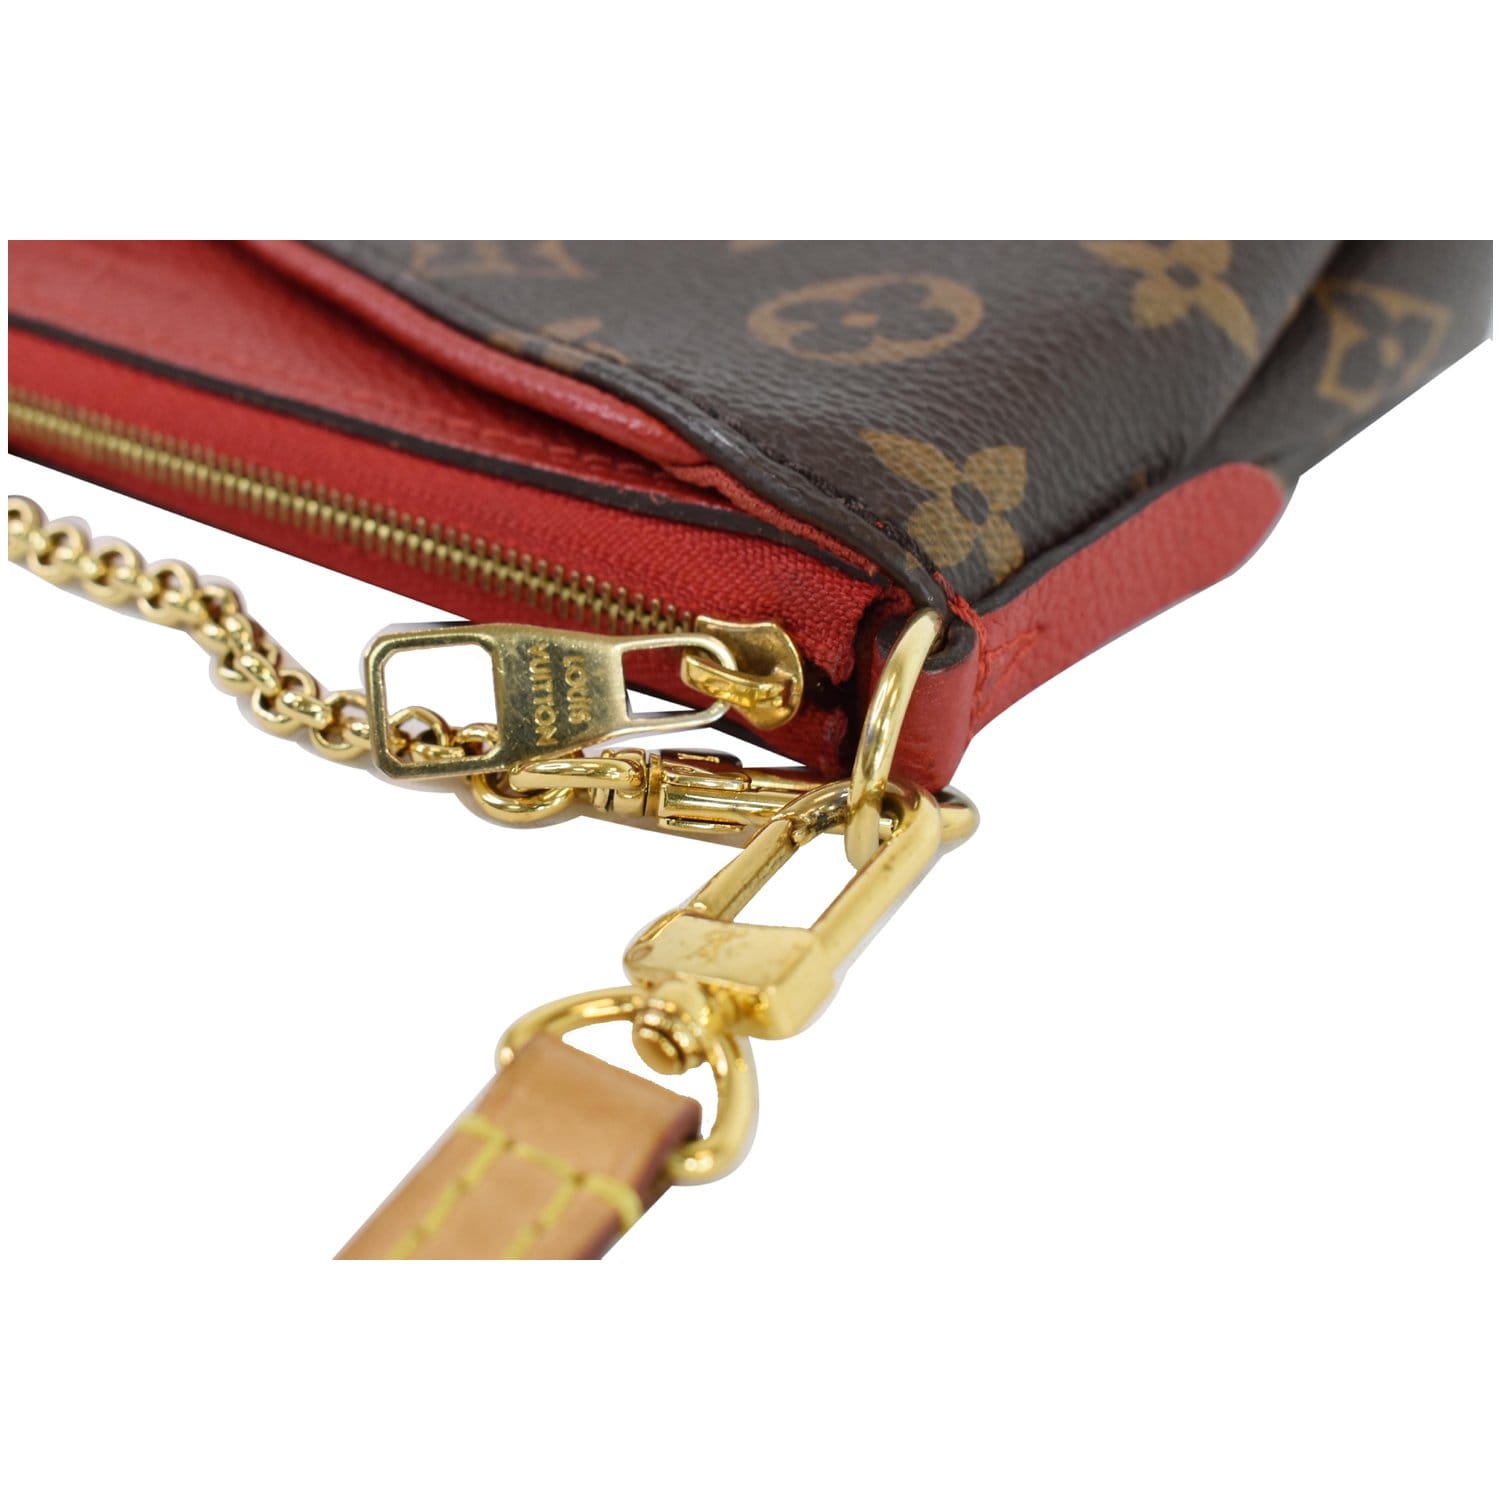 Pallas leather crossbody bag Louis Vuitton Brown in Leather - 36770869